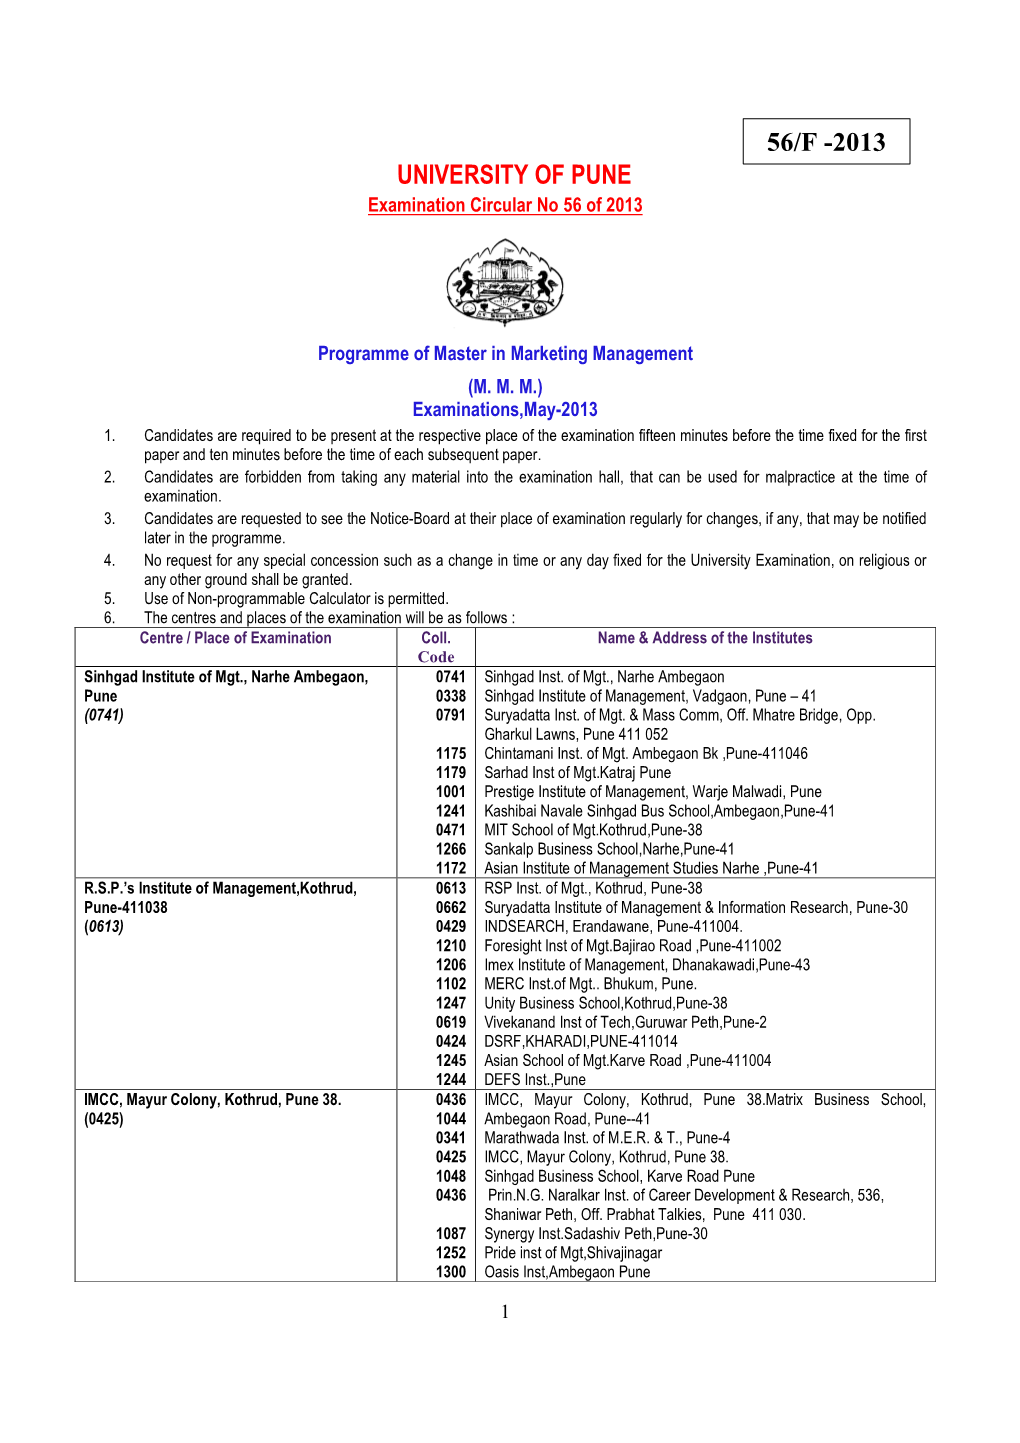 Programme of the M.M.M. Examination Apr-2013